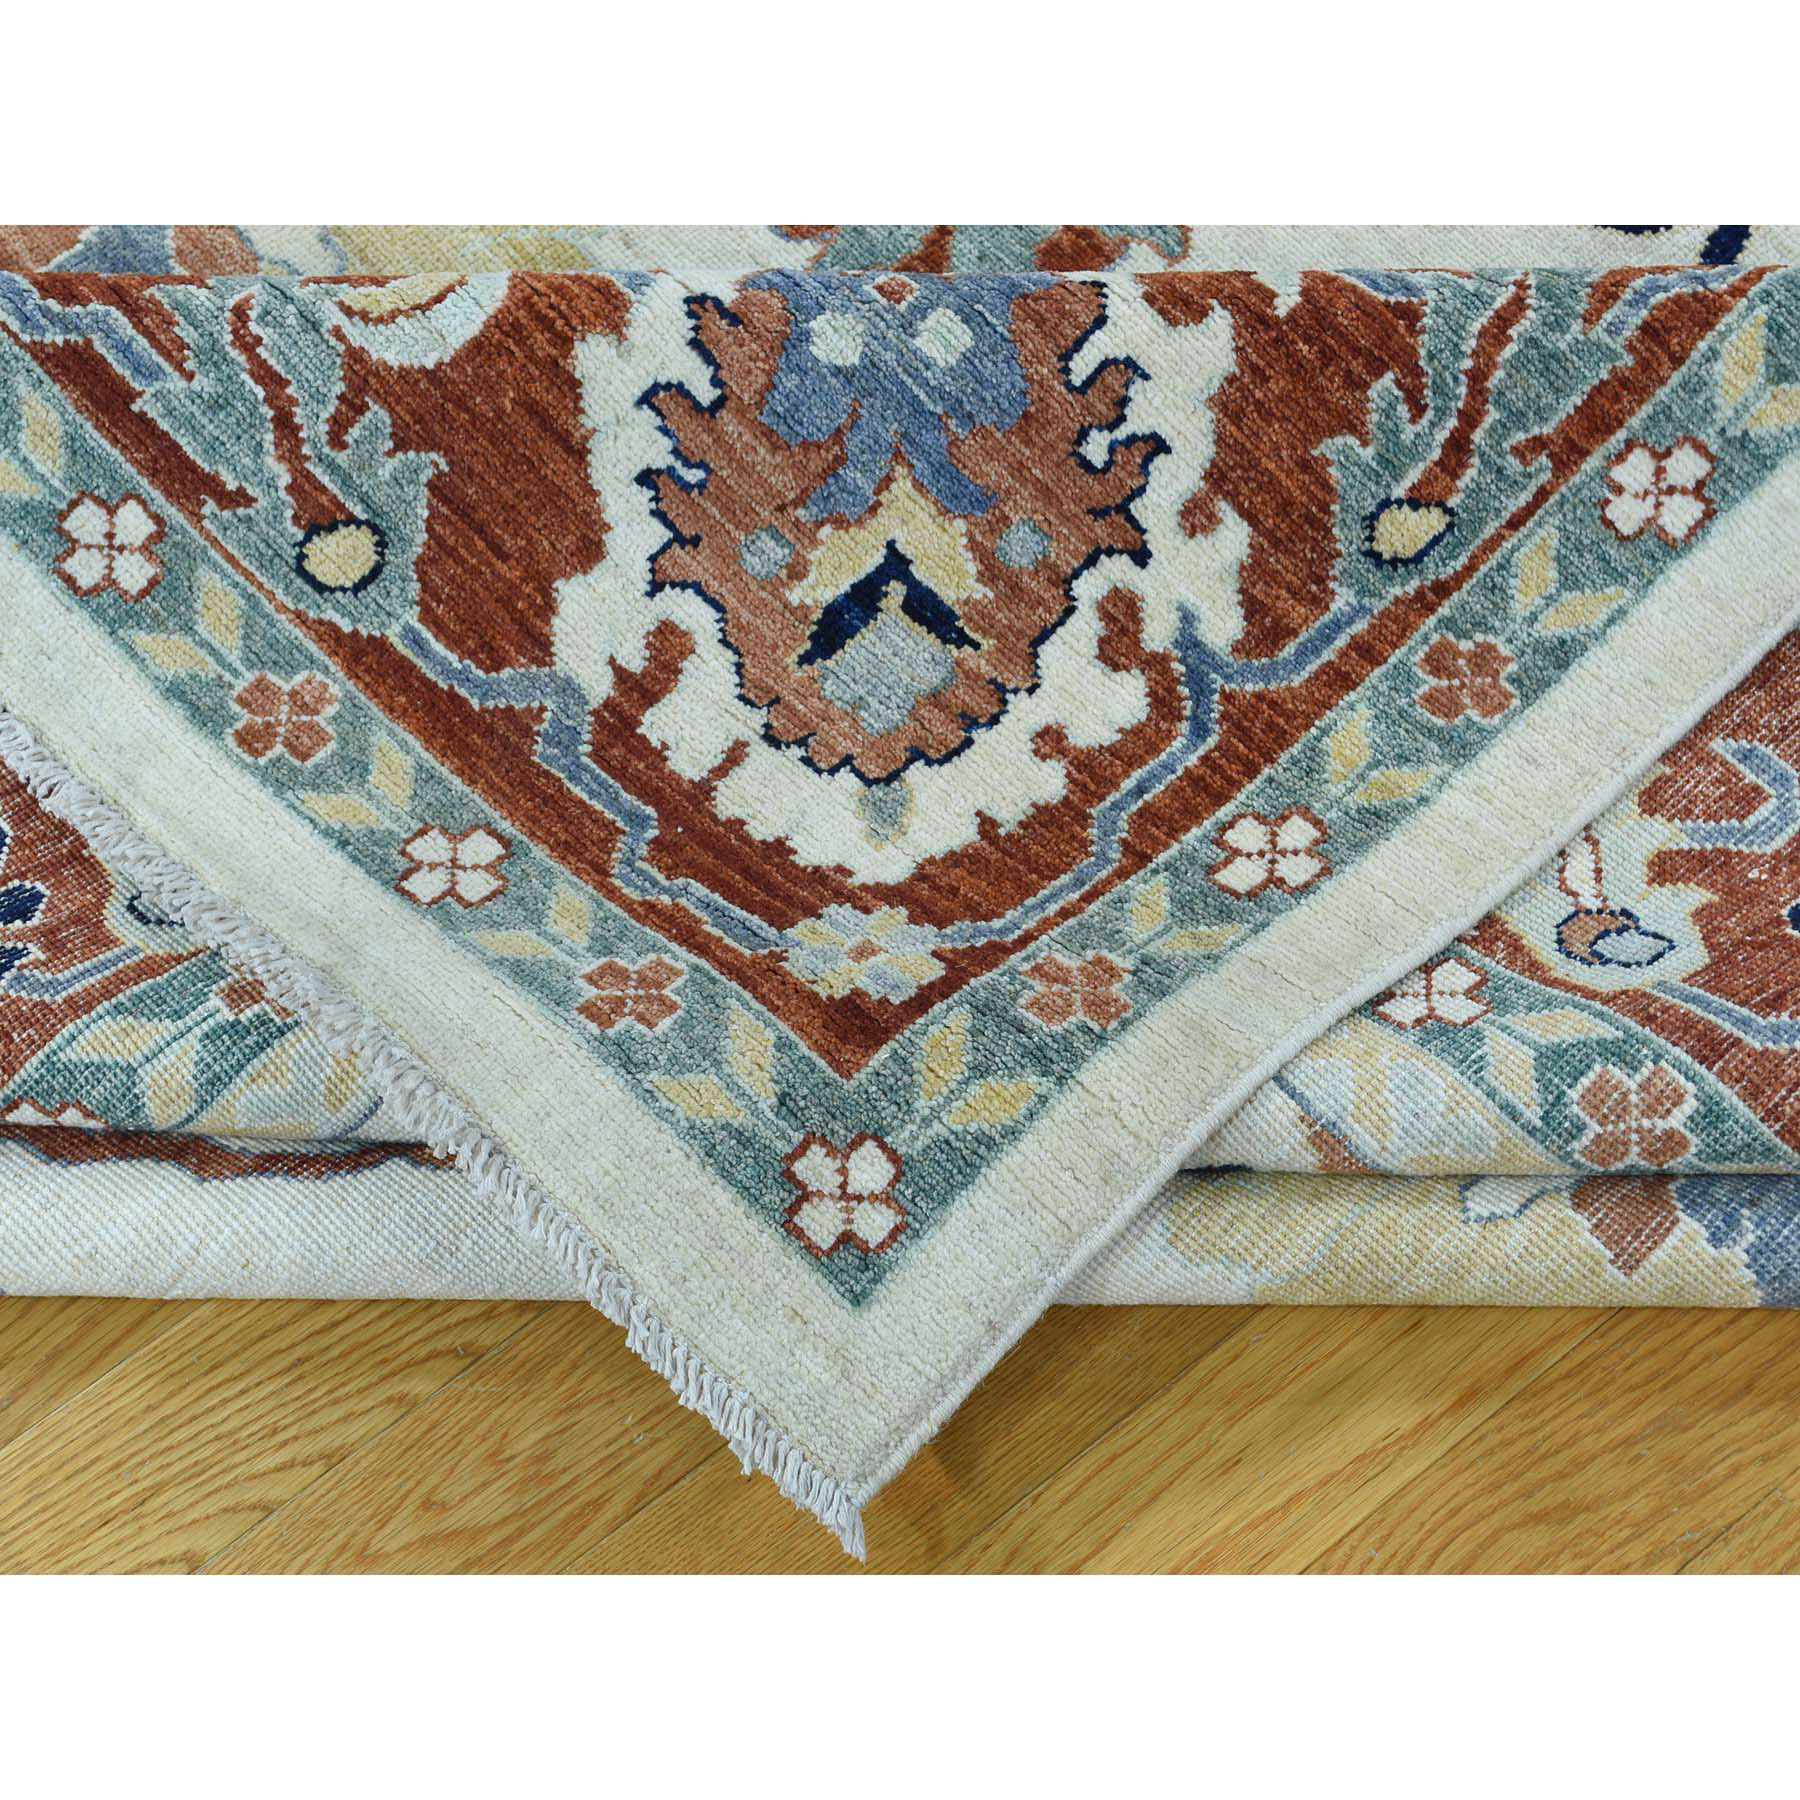 9-1 x12-1  Peshawar Sultanabad Design Hand-Knotted Pure Wool Oriental Rug 